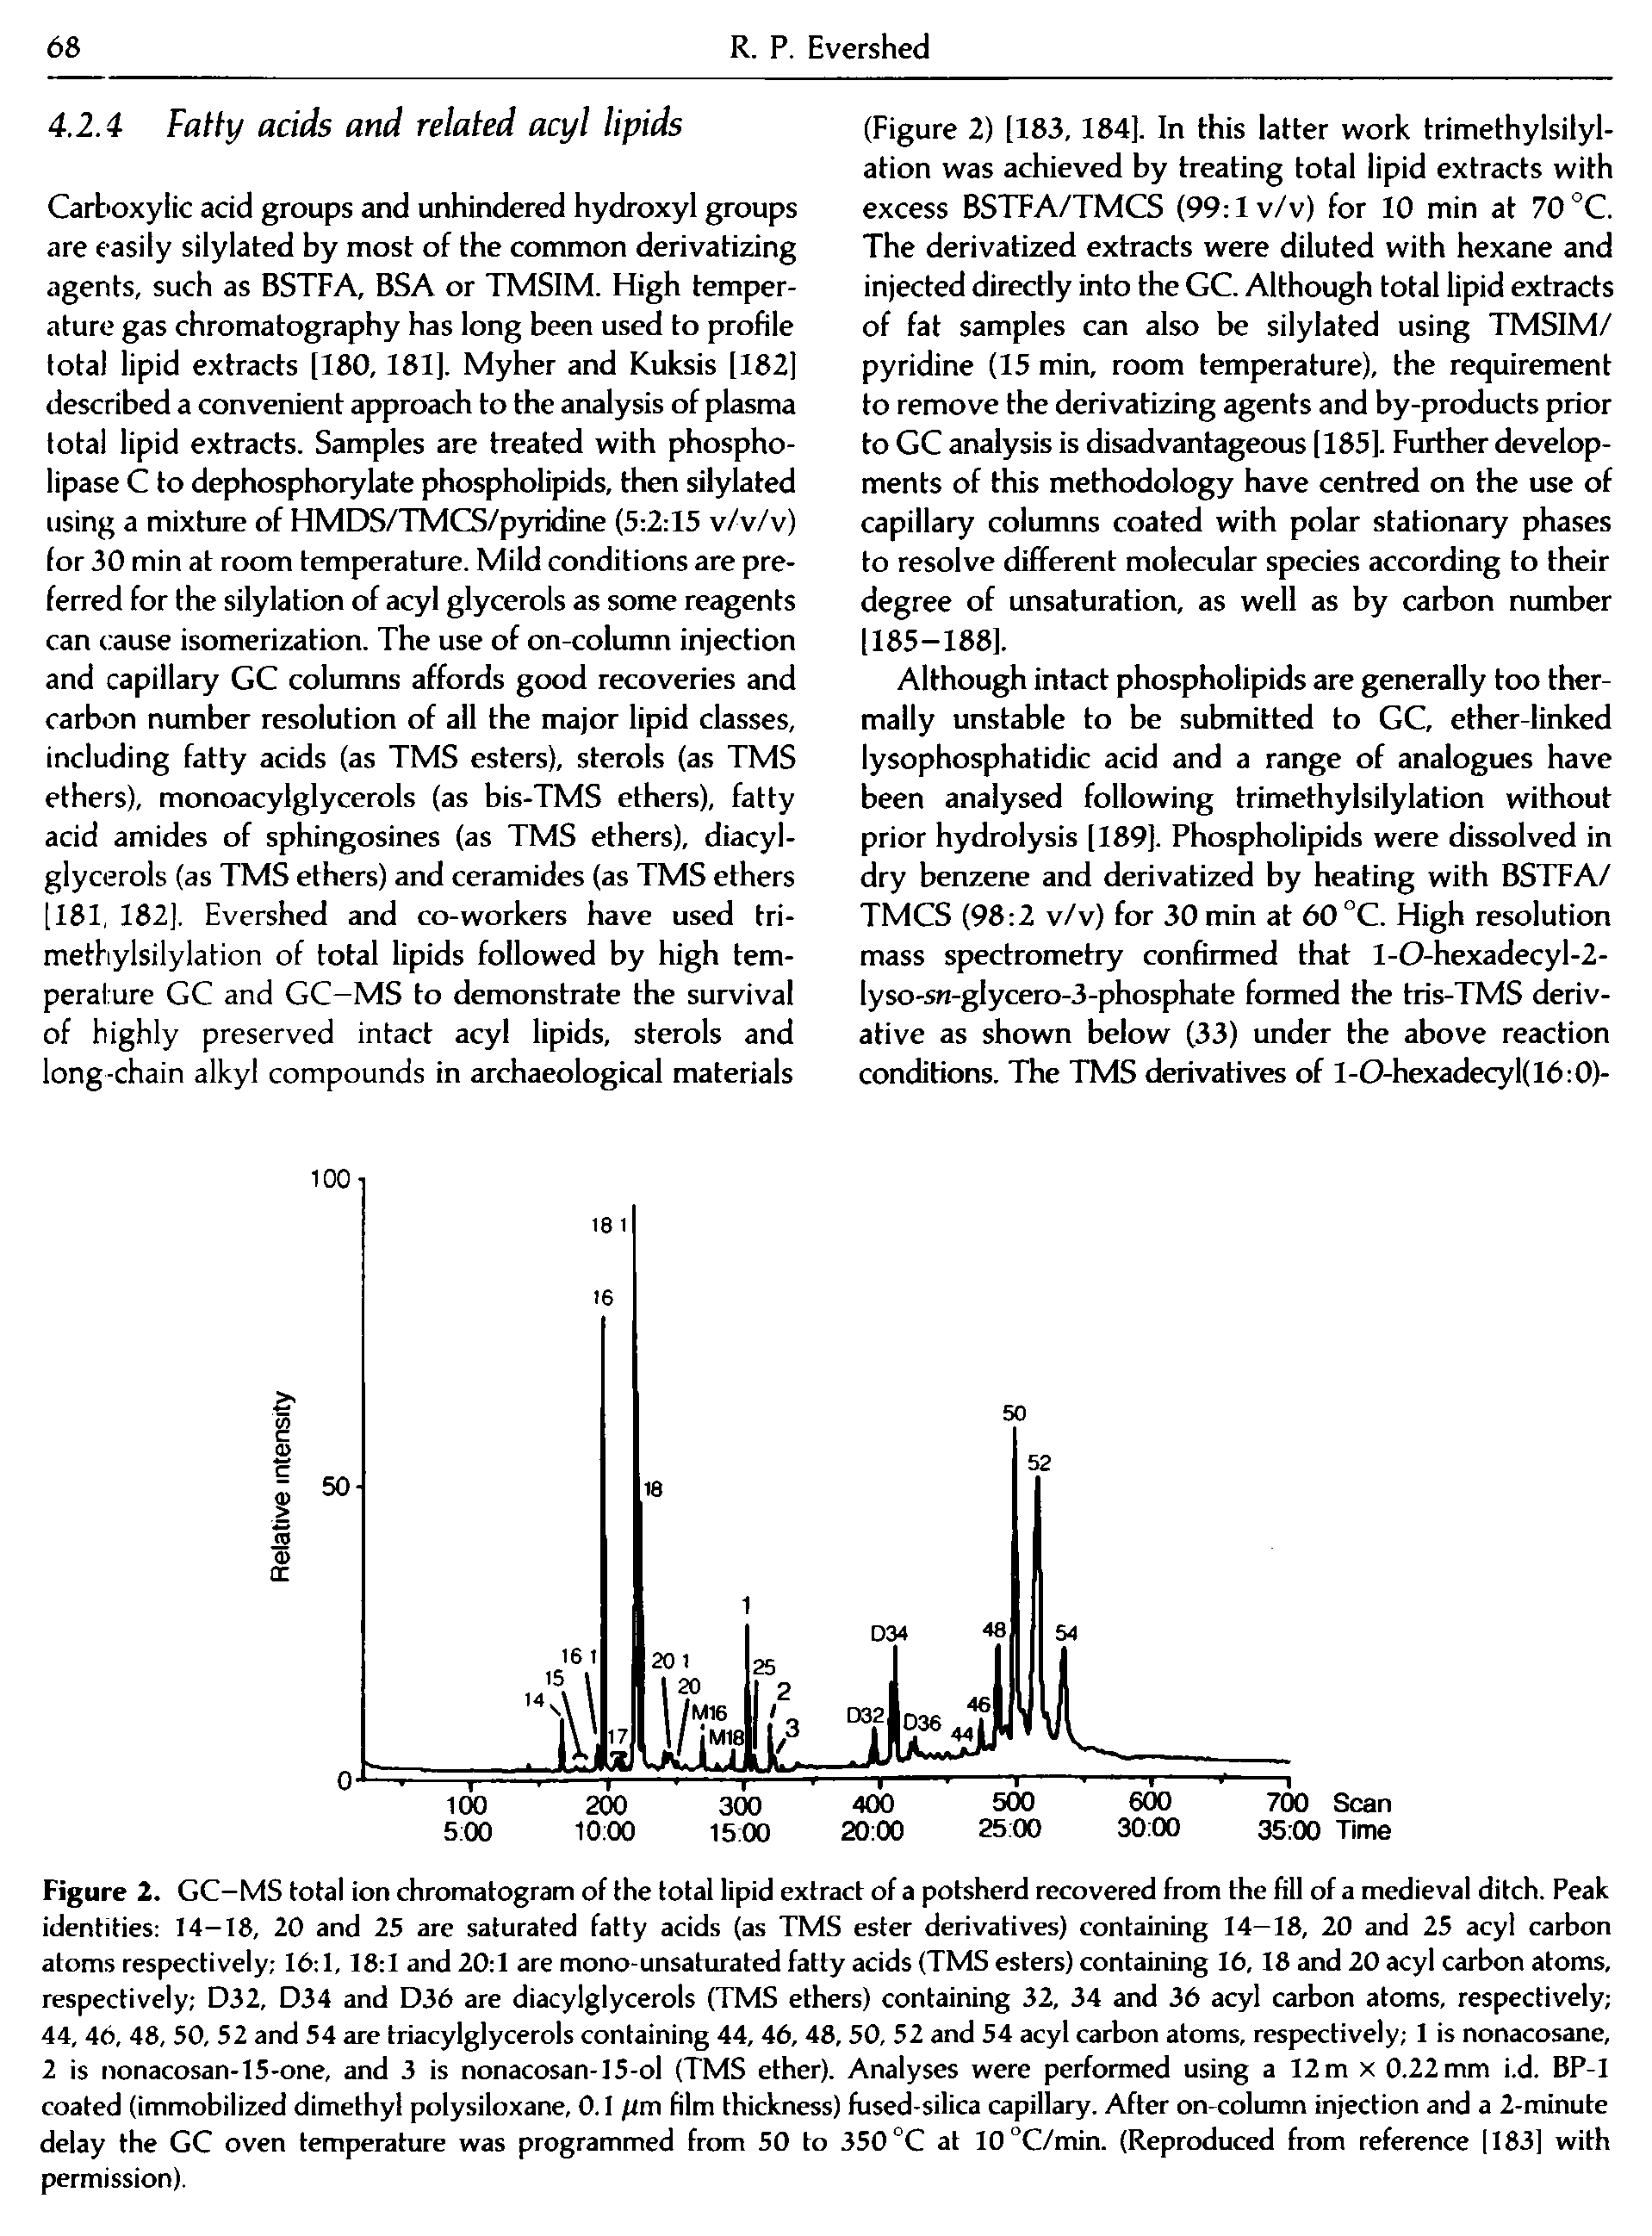 Figure 2. GC-MS total ion chromatogram of the total lipid extract of a potsherd recovered from the fill of a medieval ditch. Peak identities I4-T8, 20 and 25 are saturated fatty acids (as TMS ester derivatives) containing 14-18, 20 and 25 acyl carbon atoms respectively 16 1,18 1 and 20 1 are mono-unsaturated fatty acids (TMS esters) containing 16,18 and 20 acyl carbon atoms, respectively D32, D34 and D36 are diacylglycerols (TMS ethers) containing 32, 34 and 36 acyl carbon atoms, respectively 44, 46, 48, 50, 52 and 54 are triacylglycerols containing 44, 46, 48, 50, 52 and 54 acyl carbon atoms, respectively 1 is nonacosane, 2 is nonacosan-15-one, and 3 is nonacosan-lS-ol (TMS ether). Analyses were performed using a I2m x 0.22 mm i.d. BP-1 coated (immobilized dimethyl polysiloxane, 0.1 flm film thickness) fused-silica capillary. After on-column injection and a 2-minute delay the GC oven temperature was programmed from 50 to 350 °C at 10°C/min. (Reproduced from reference 1183] with permission).